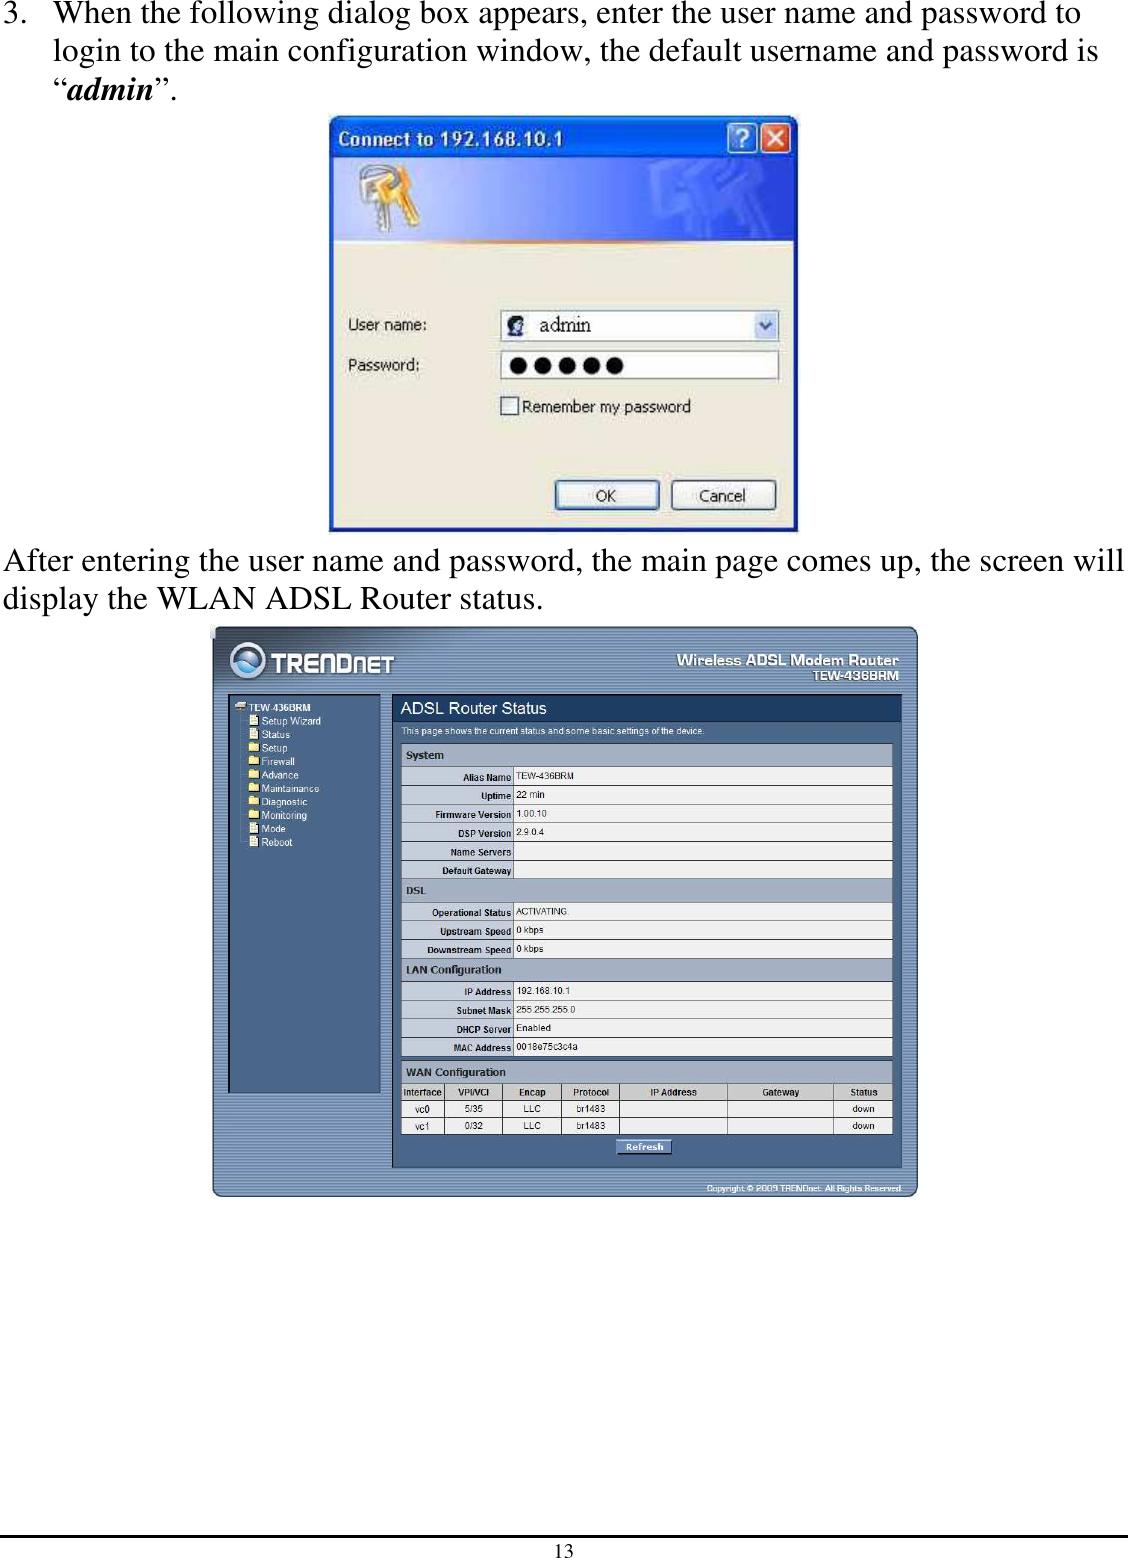 13 3. When the following dialog box appears, enter the user name and password to login to the main configuration window, the default username and password is “admin”.  After entering the user name and password, the main page comes up, the screen will display the WLAN ADSL Router status.  